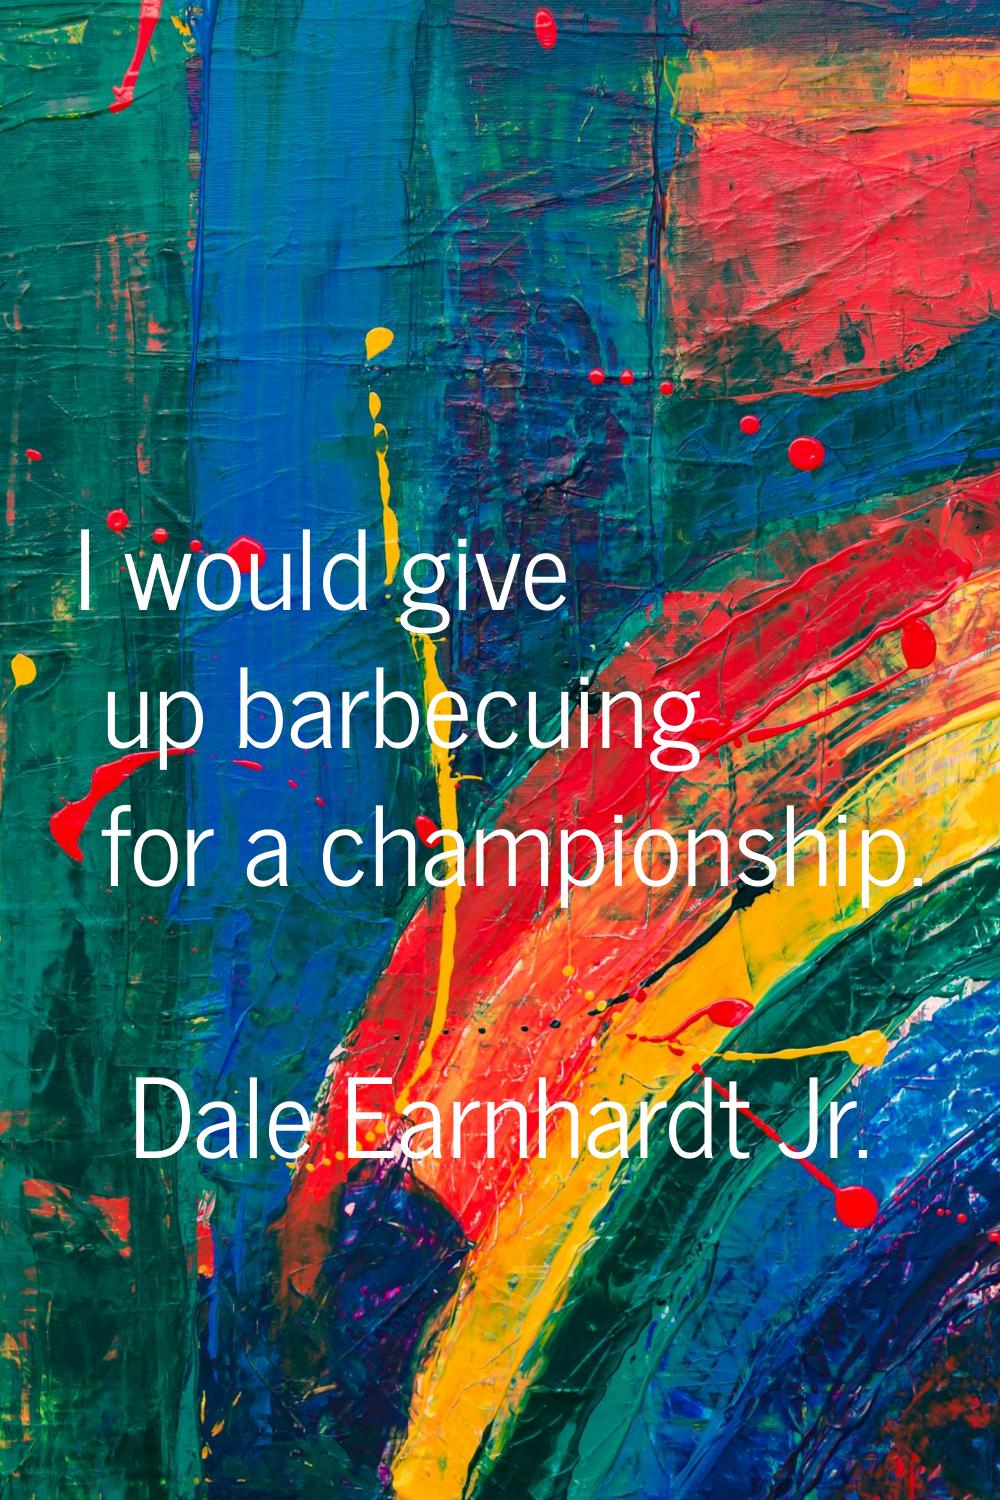 I would give up barbecuing for a championship.